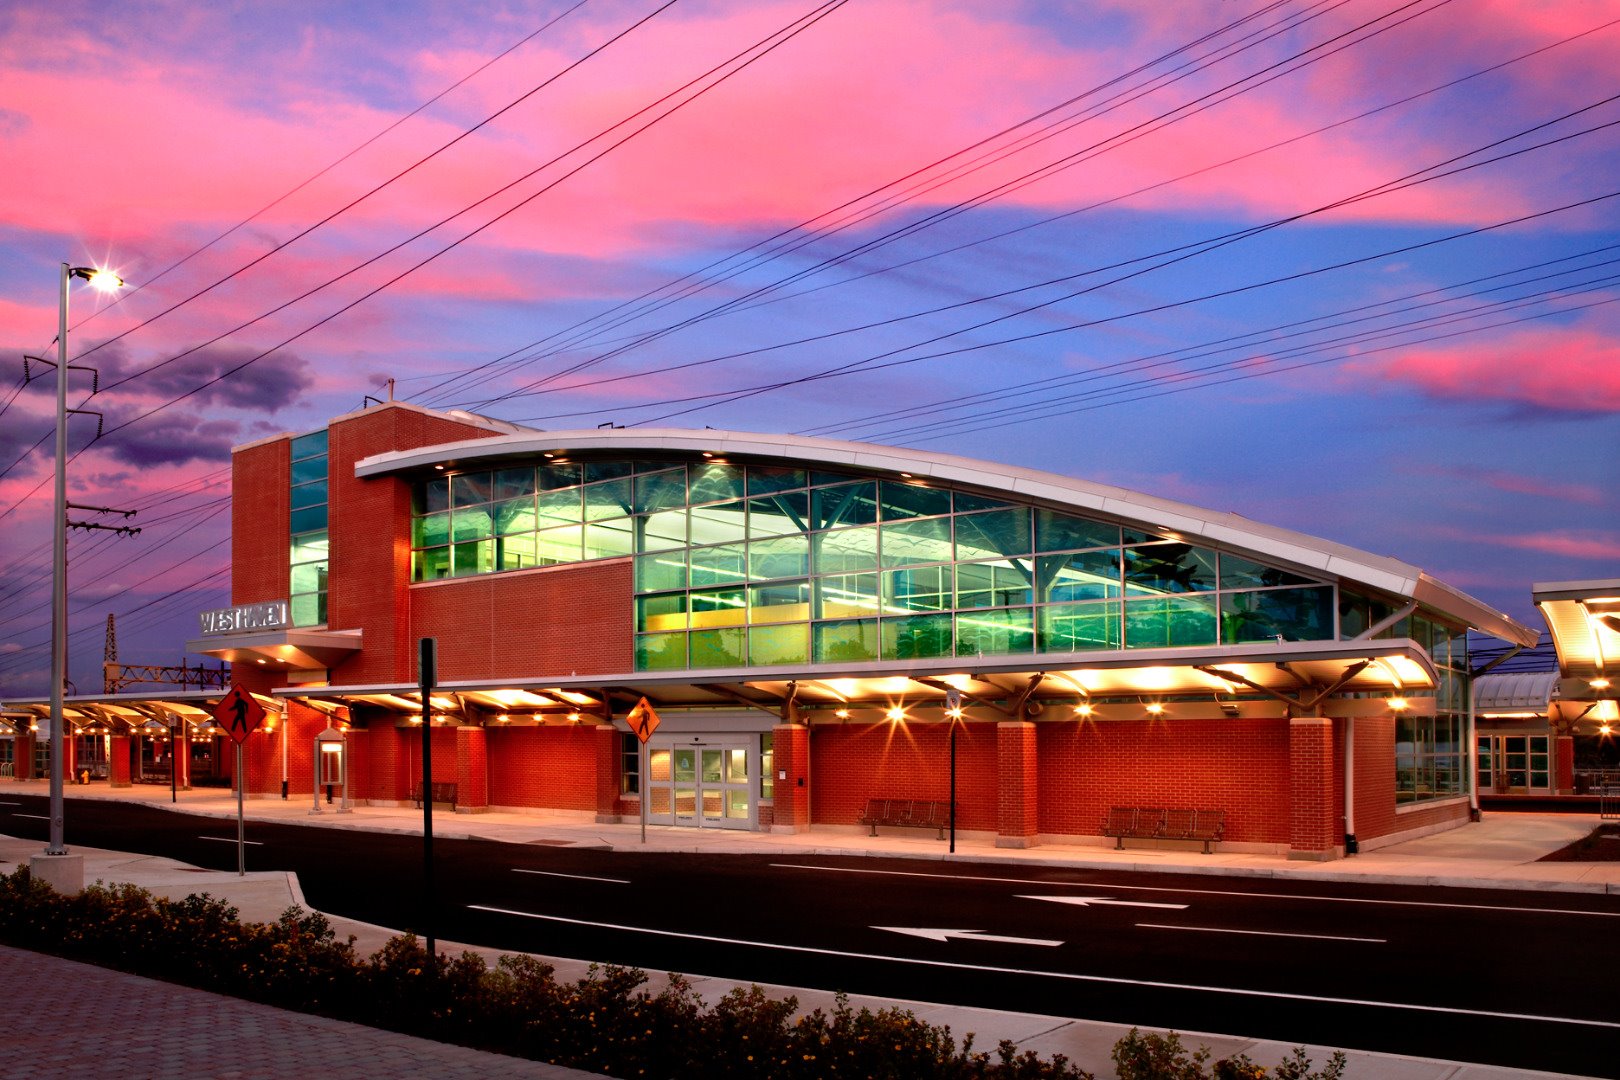 View of the entrance of West Haven Railroad Station at dusk